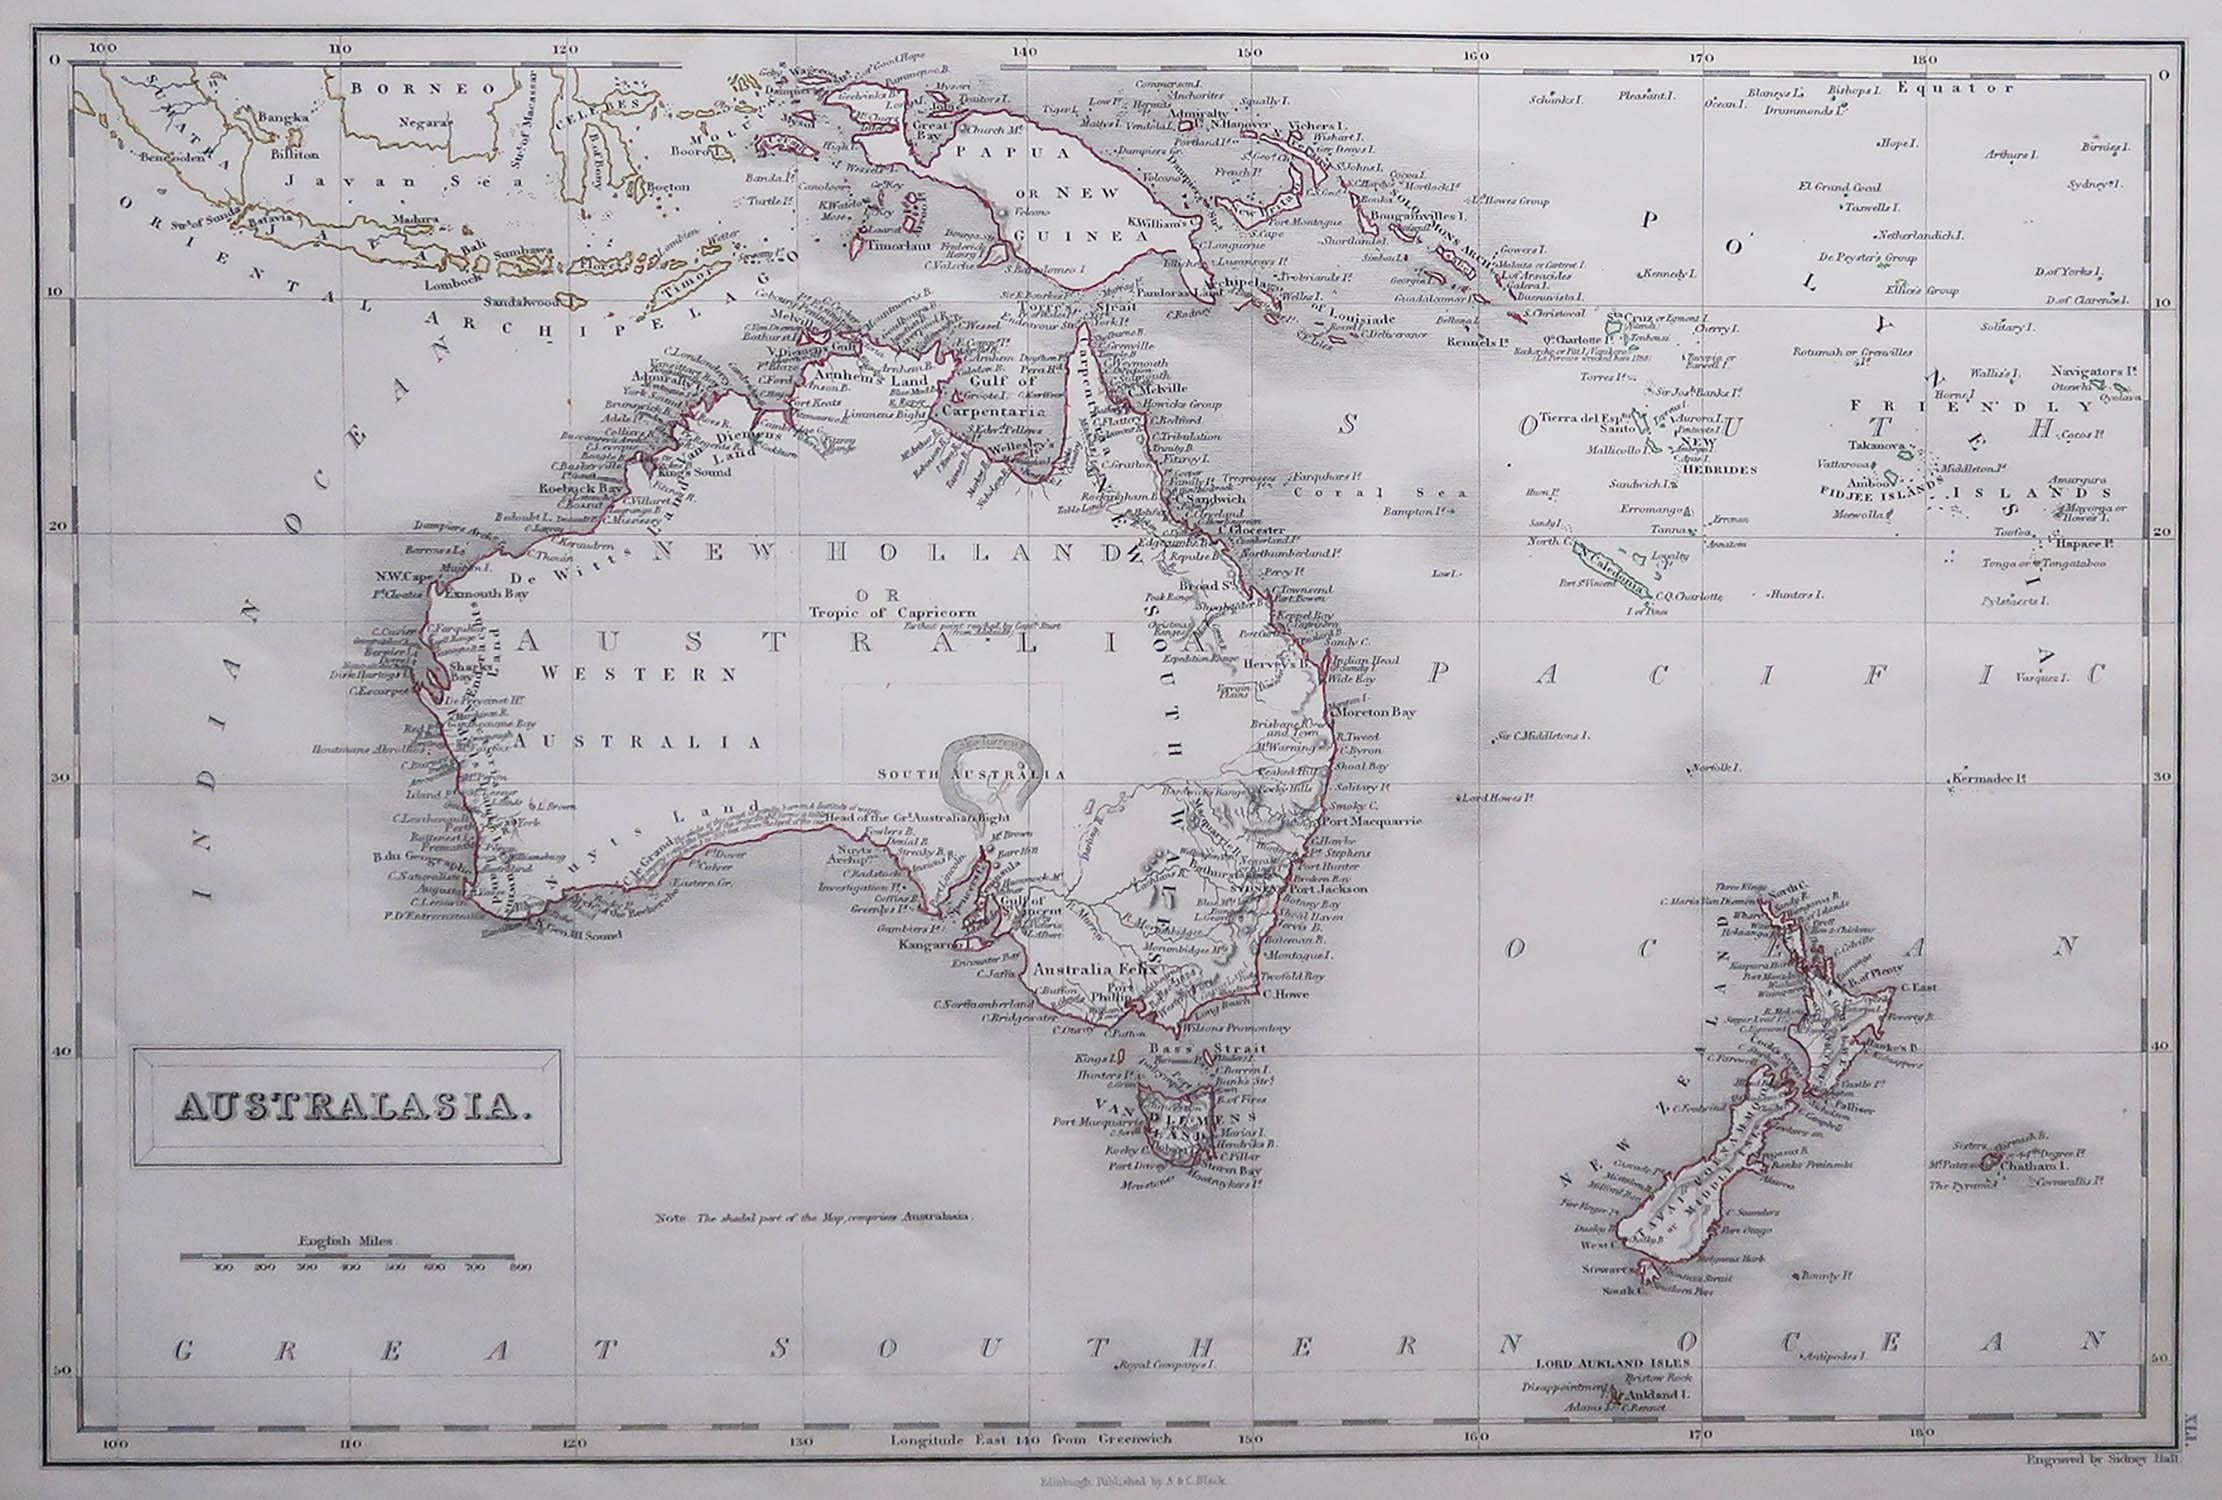 Great map of Australia

Drawn and engraved by Sidney Hall

Steel engraving 

Original colour outline

Published by A & C Black. 1847

Unframed

Free shipping.

